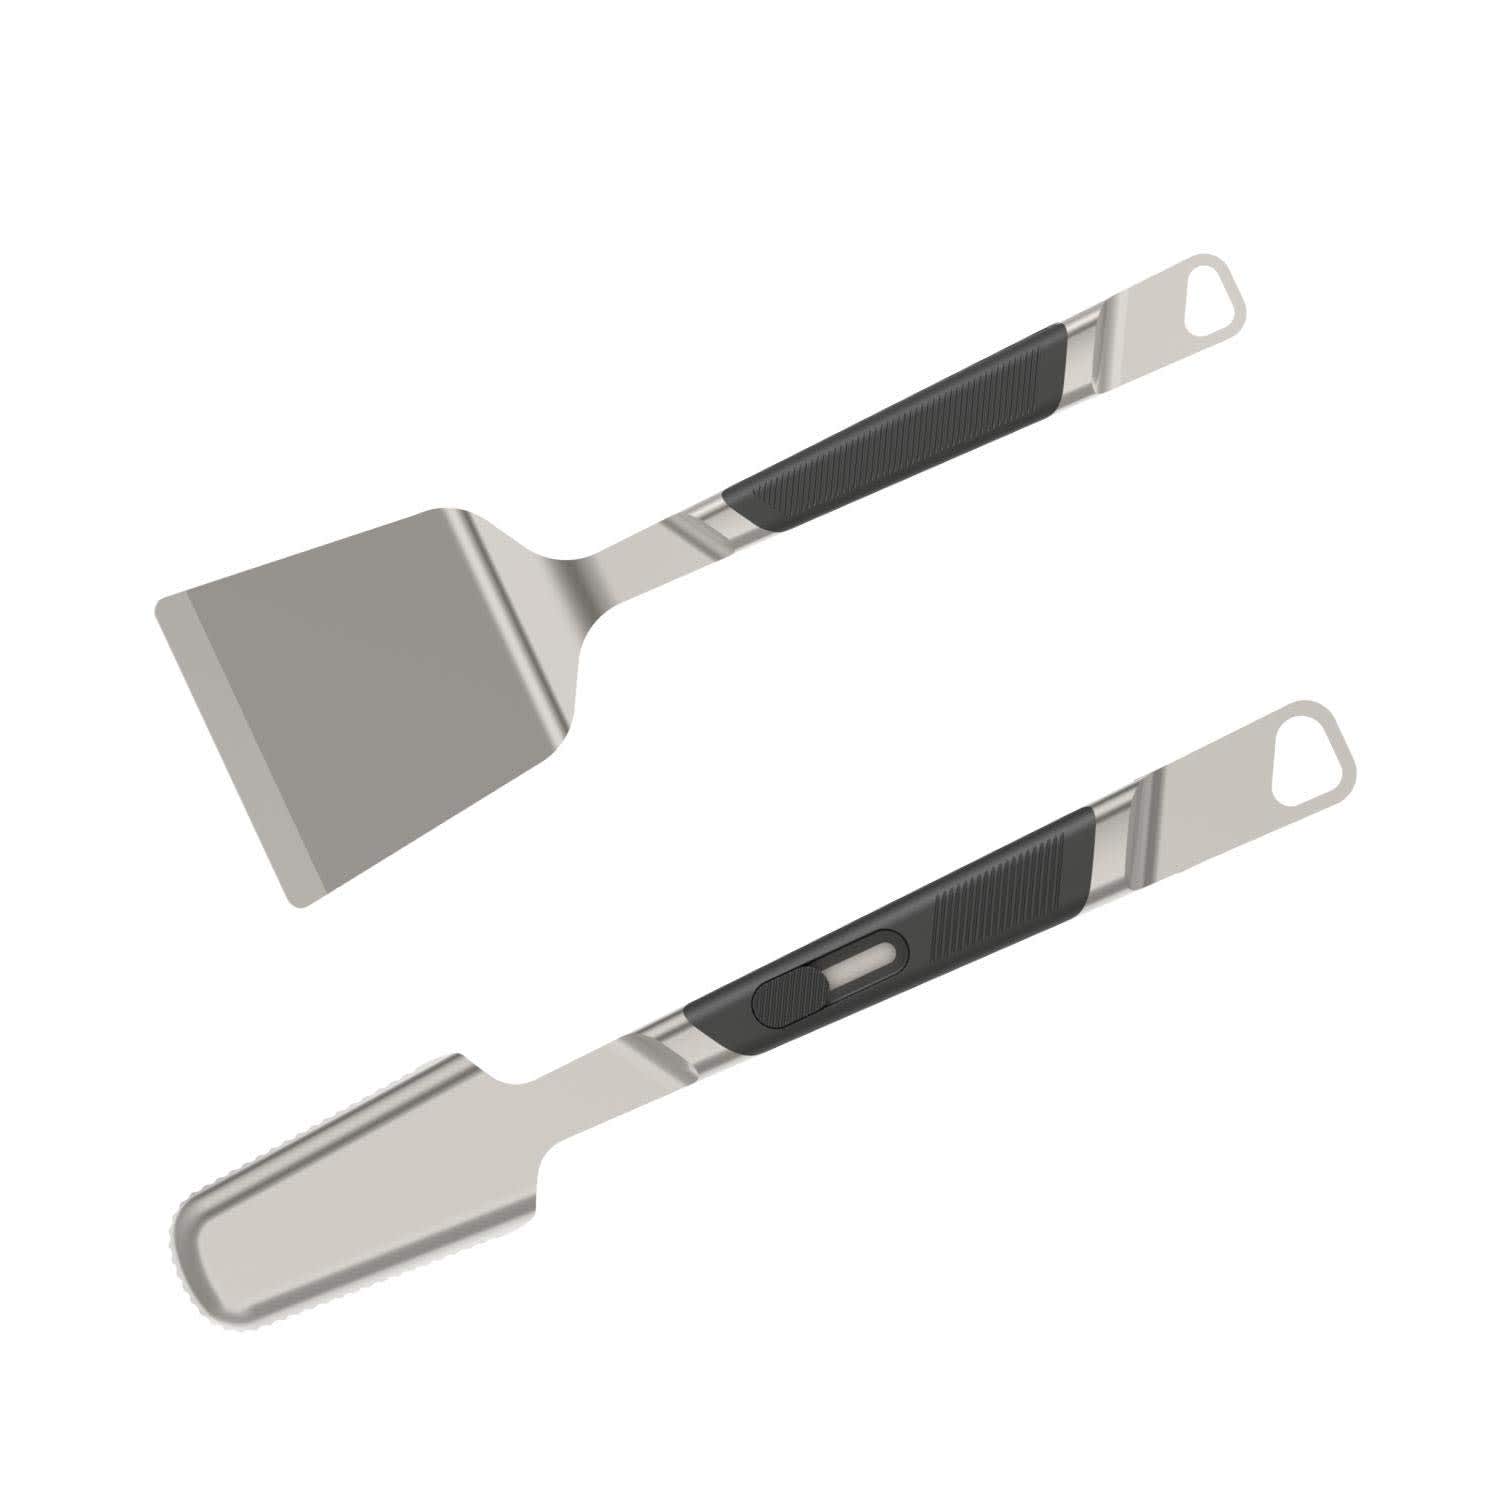 What Griddle Spatula to Buy? I Tried 15 Spatulas to Find the Best!